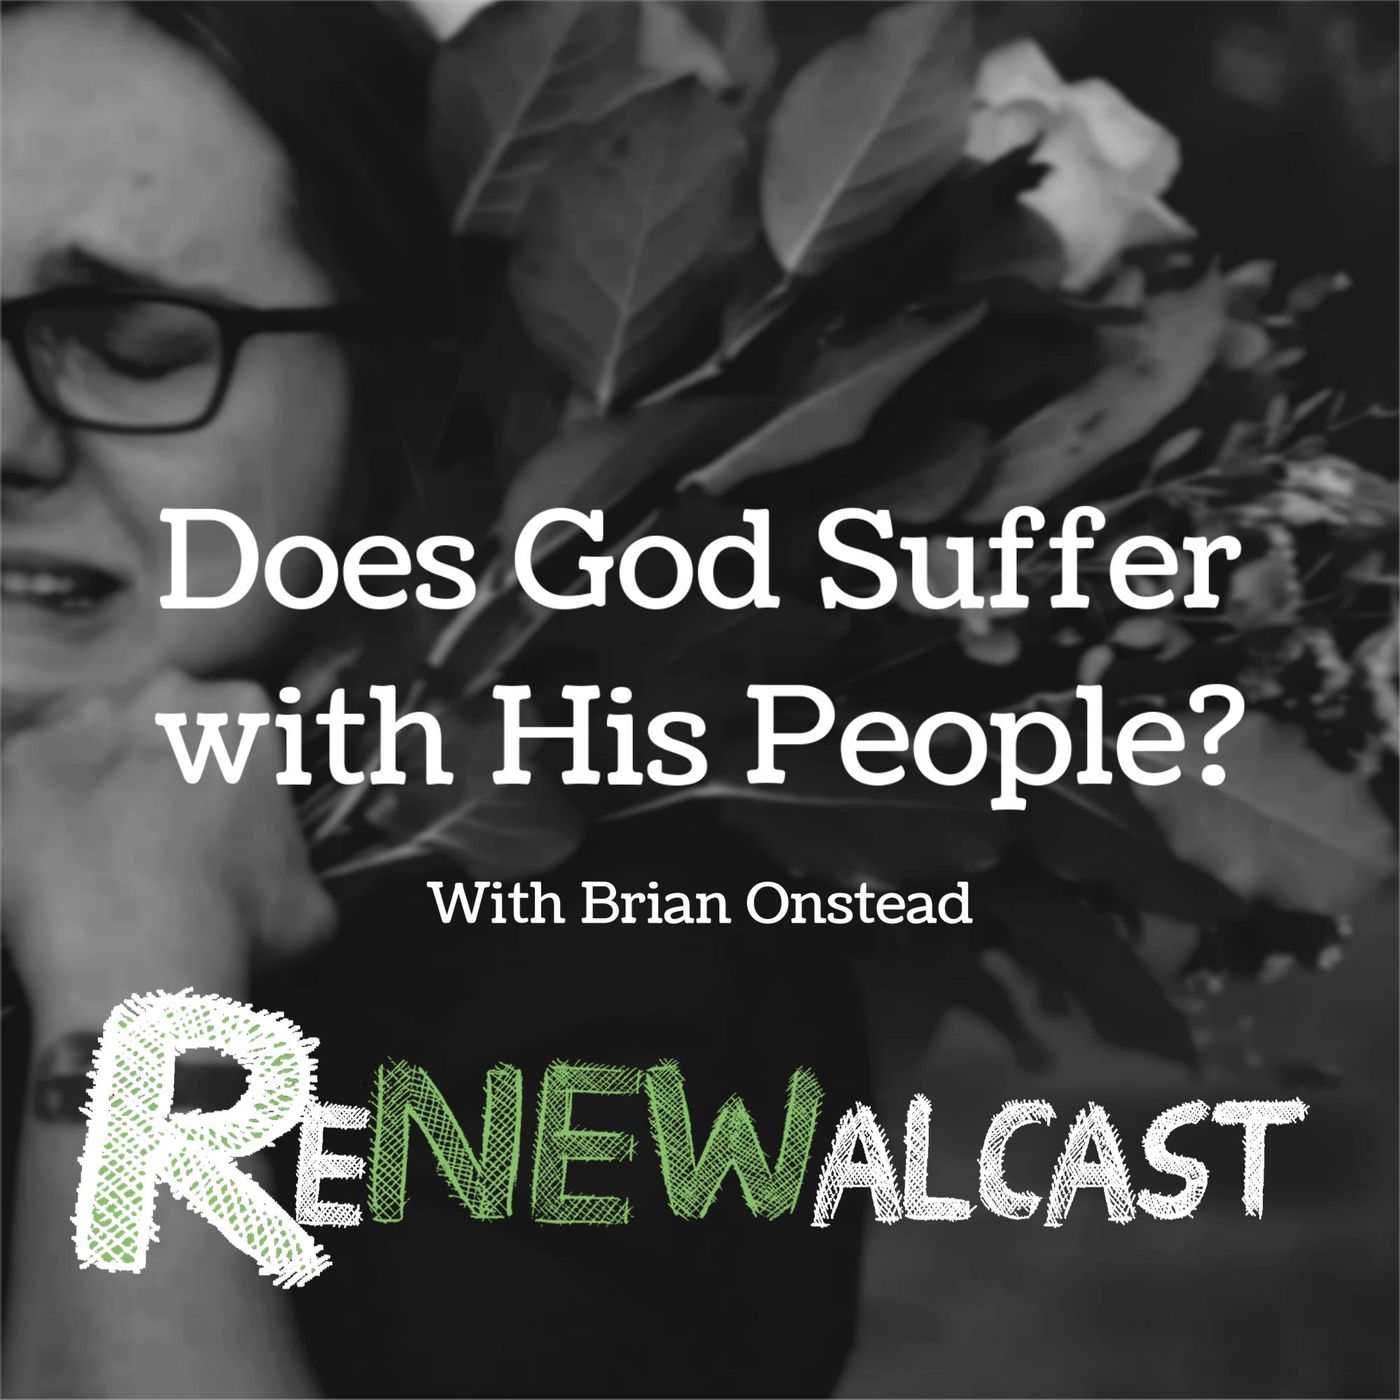 Does God Suffer with His People? With Brian Onstead